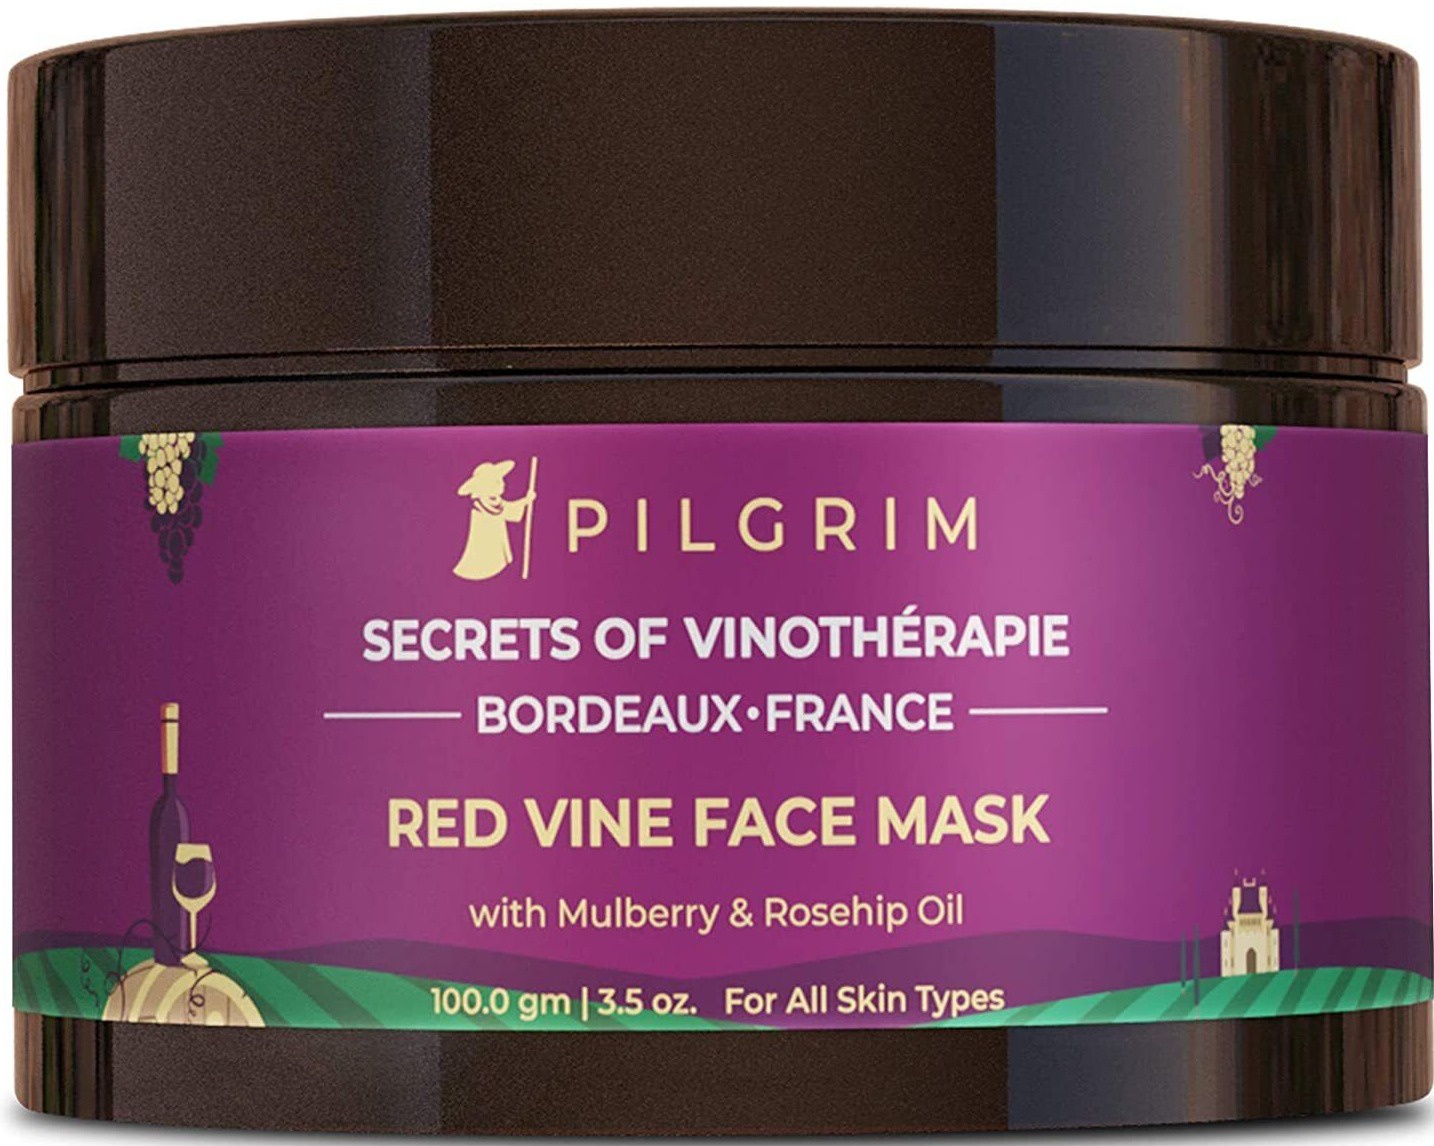 Pilgrim Red Vine Face Mask With Mulberry & Rosehip Oil